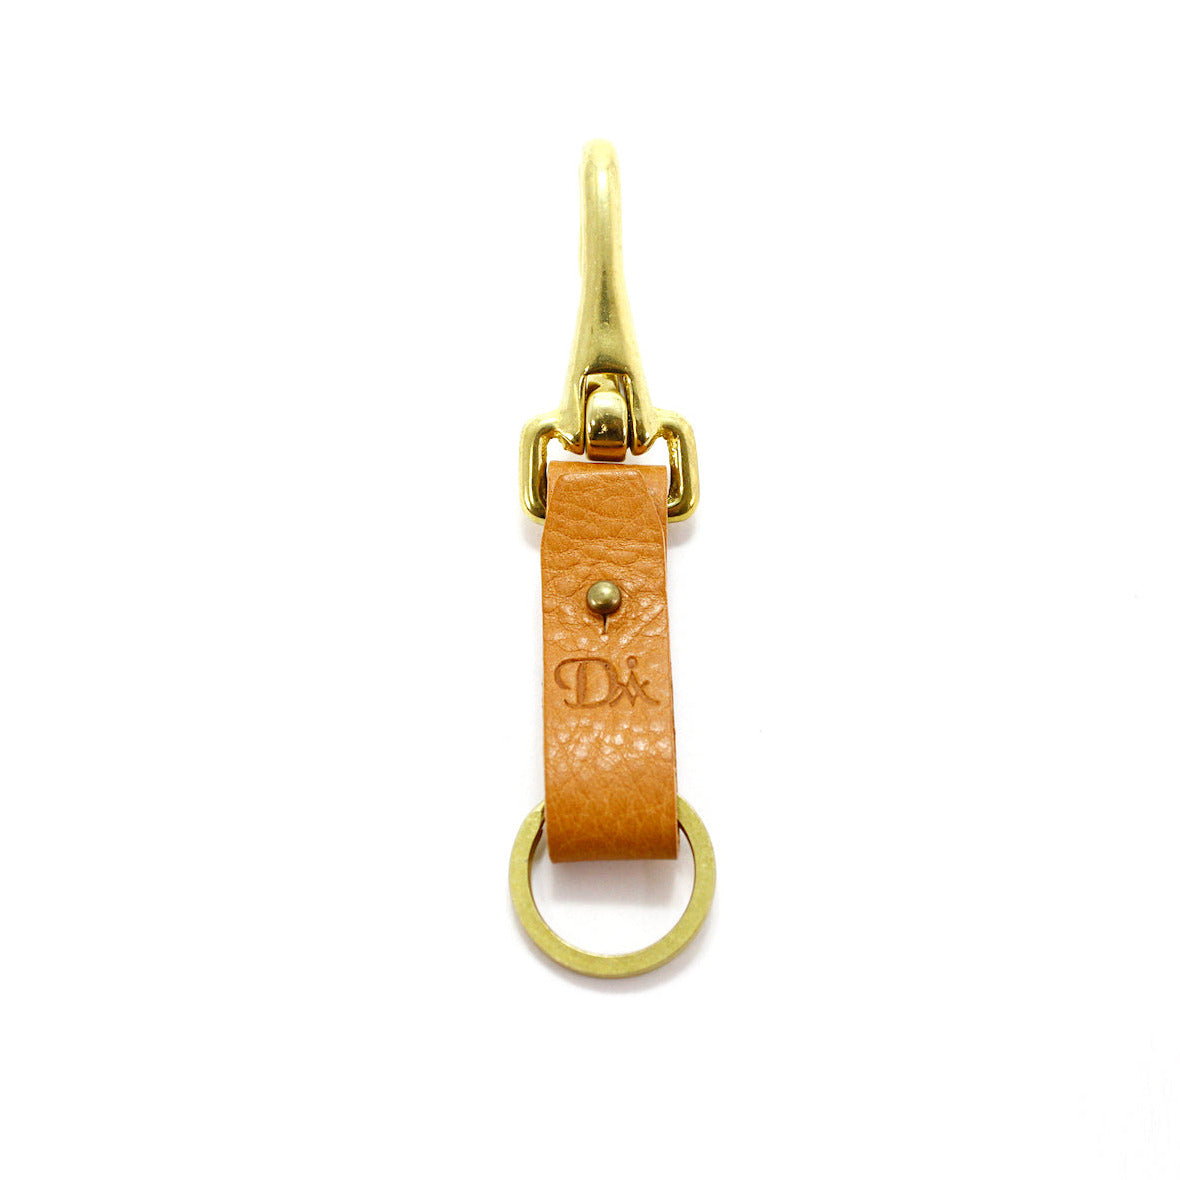 Brass and Leather Keyring - DIFFERENT COLORS